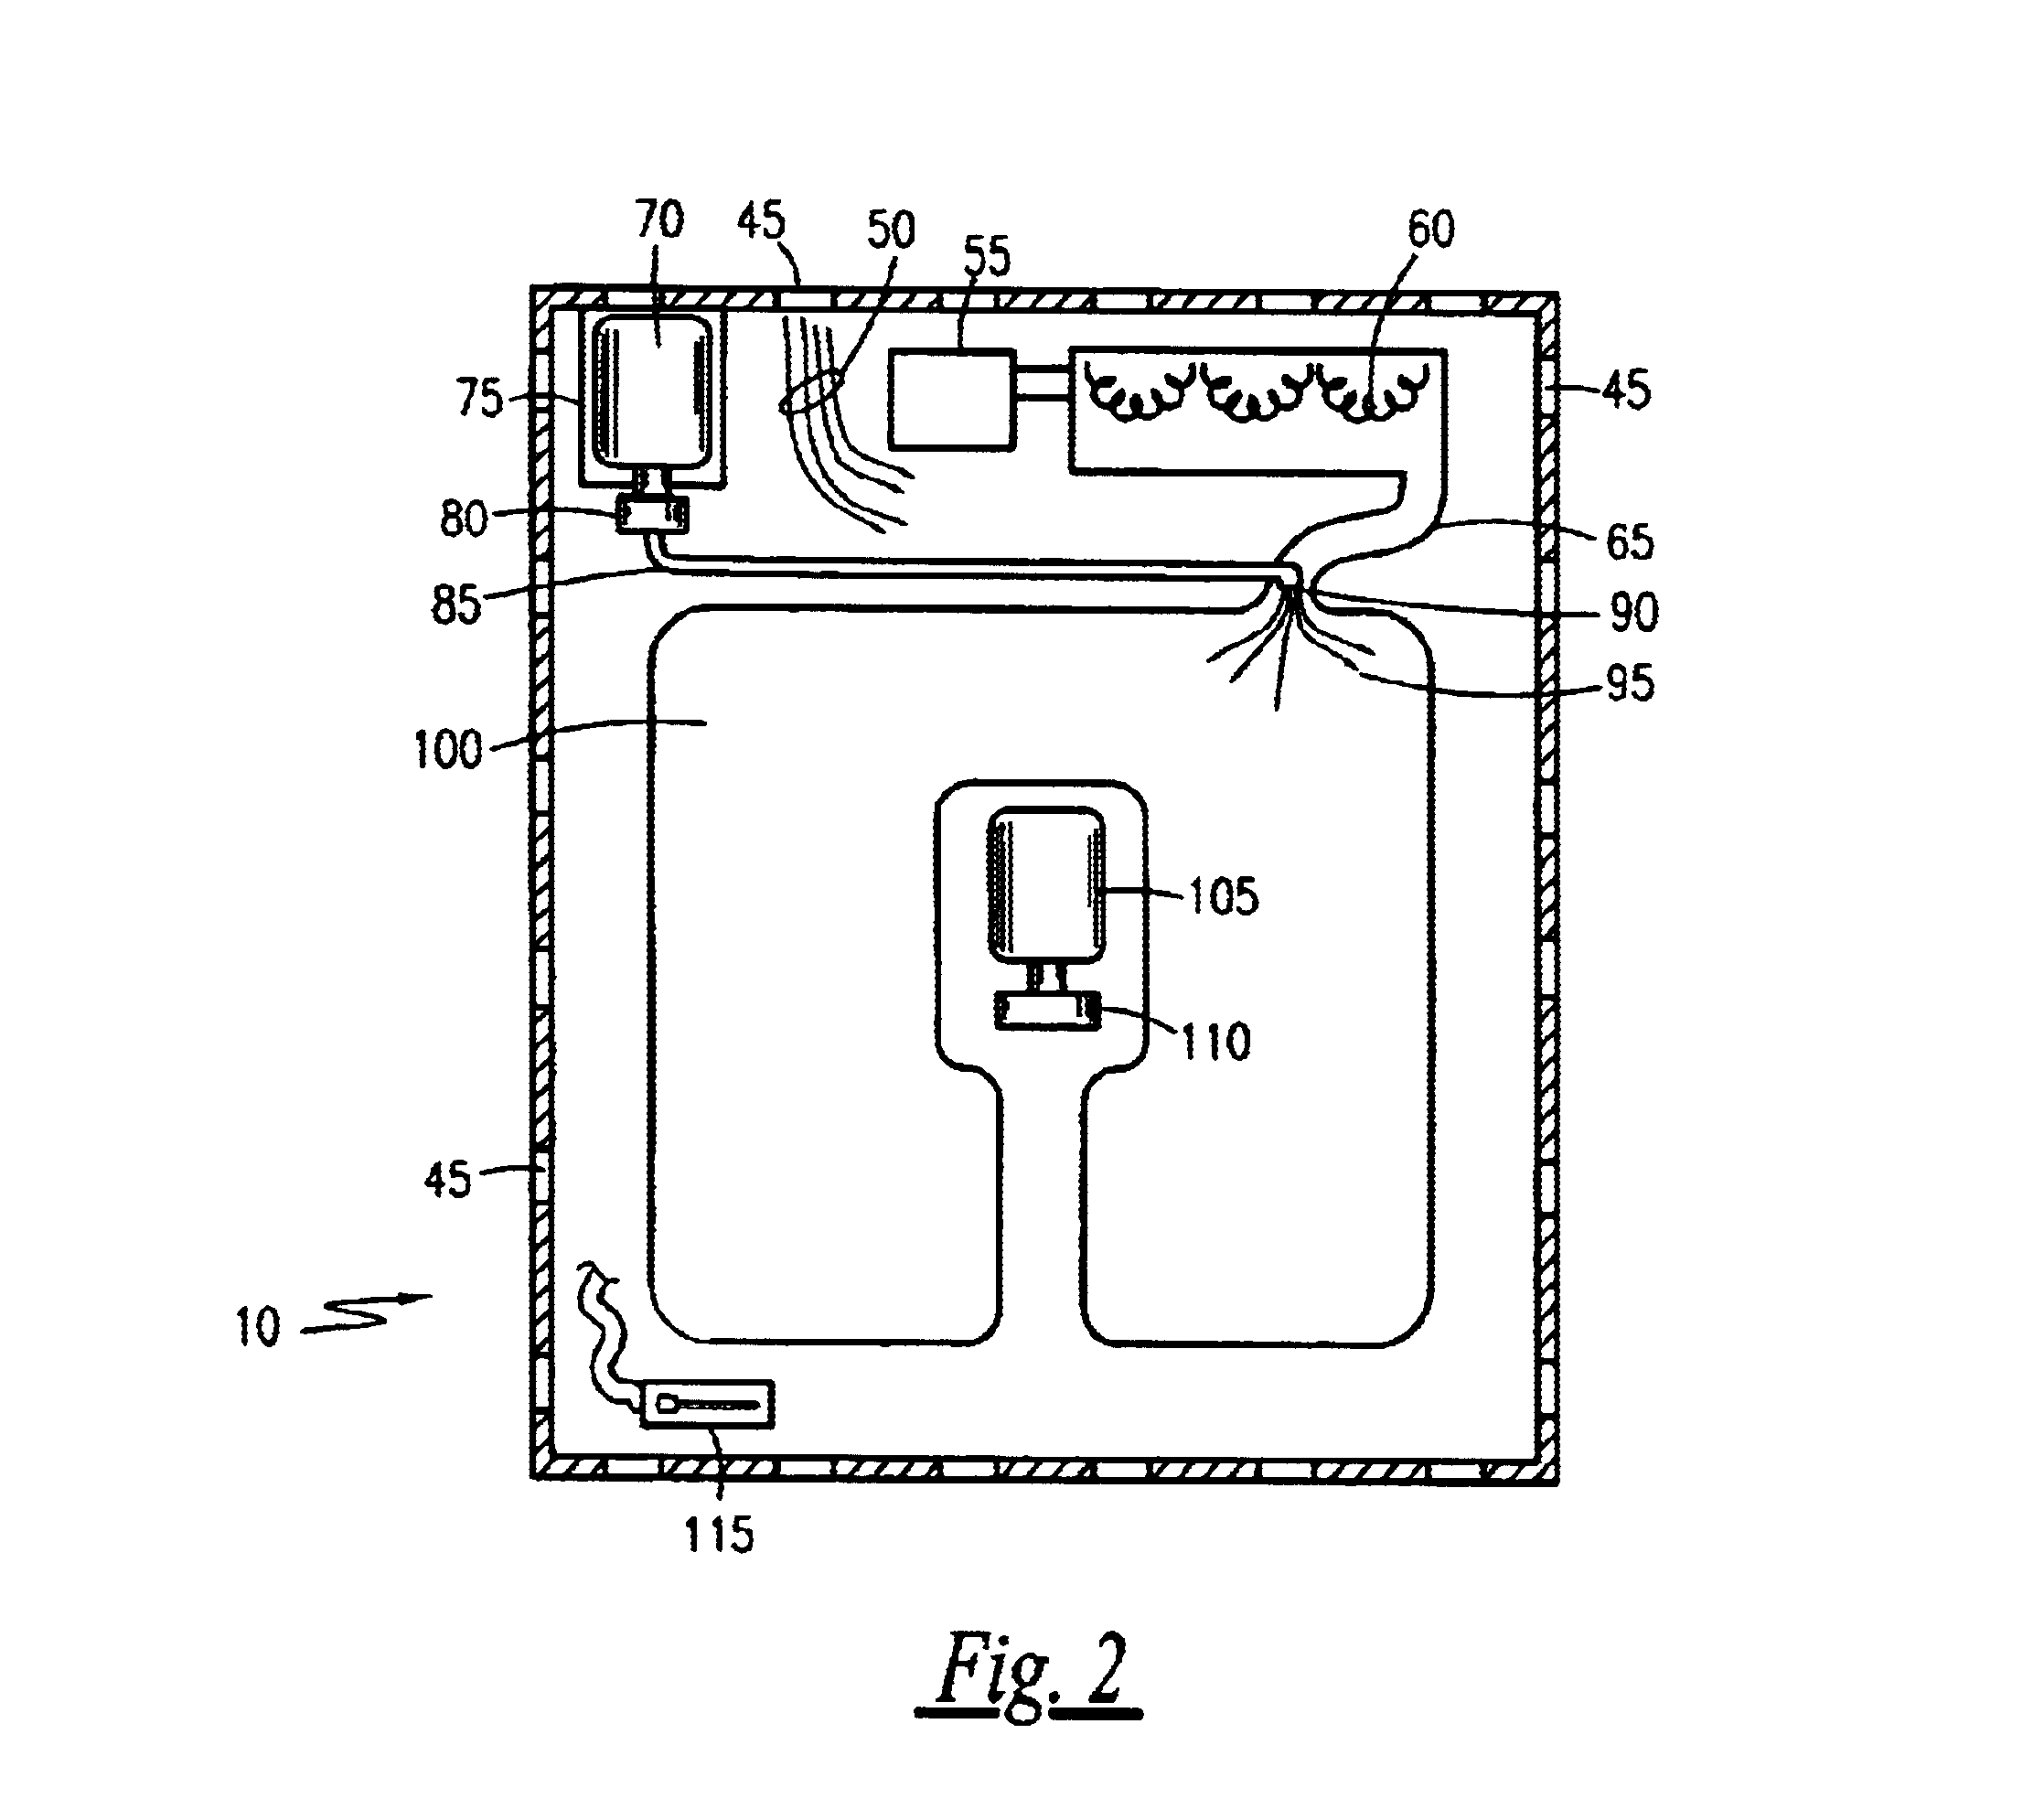 Dryer and atomized medicinal liquid apparatus for feet with shoe drying attachment